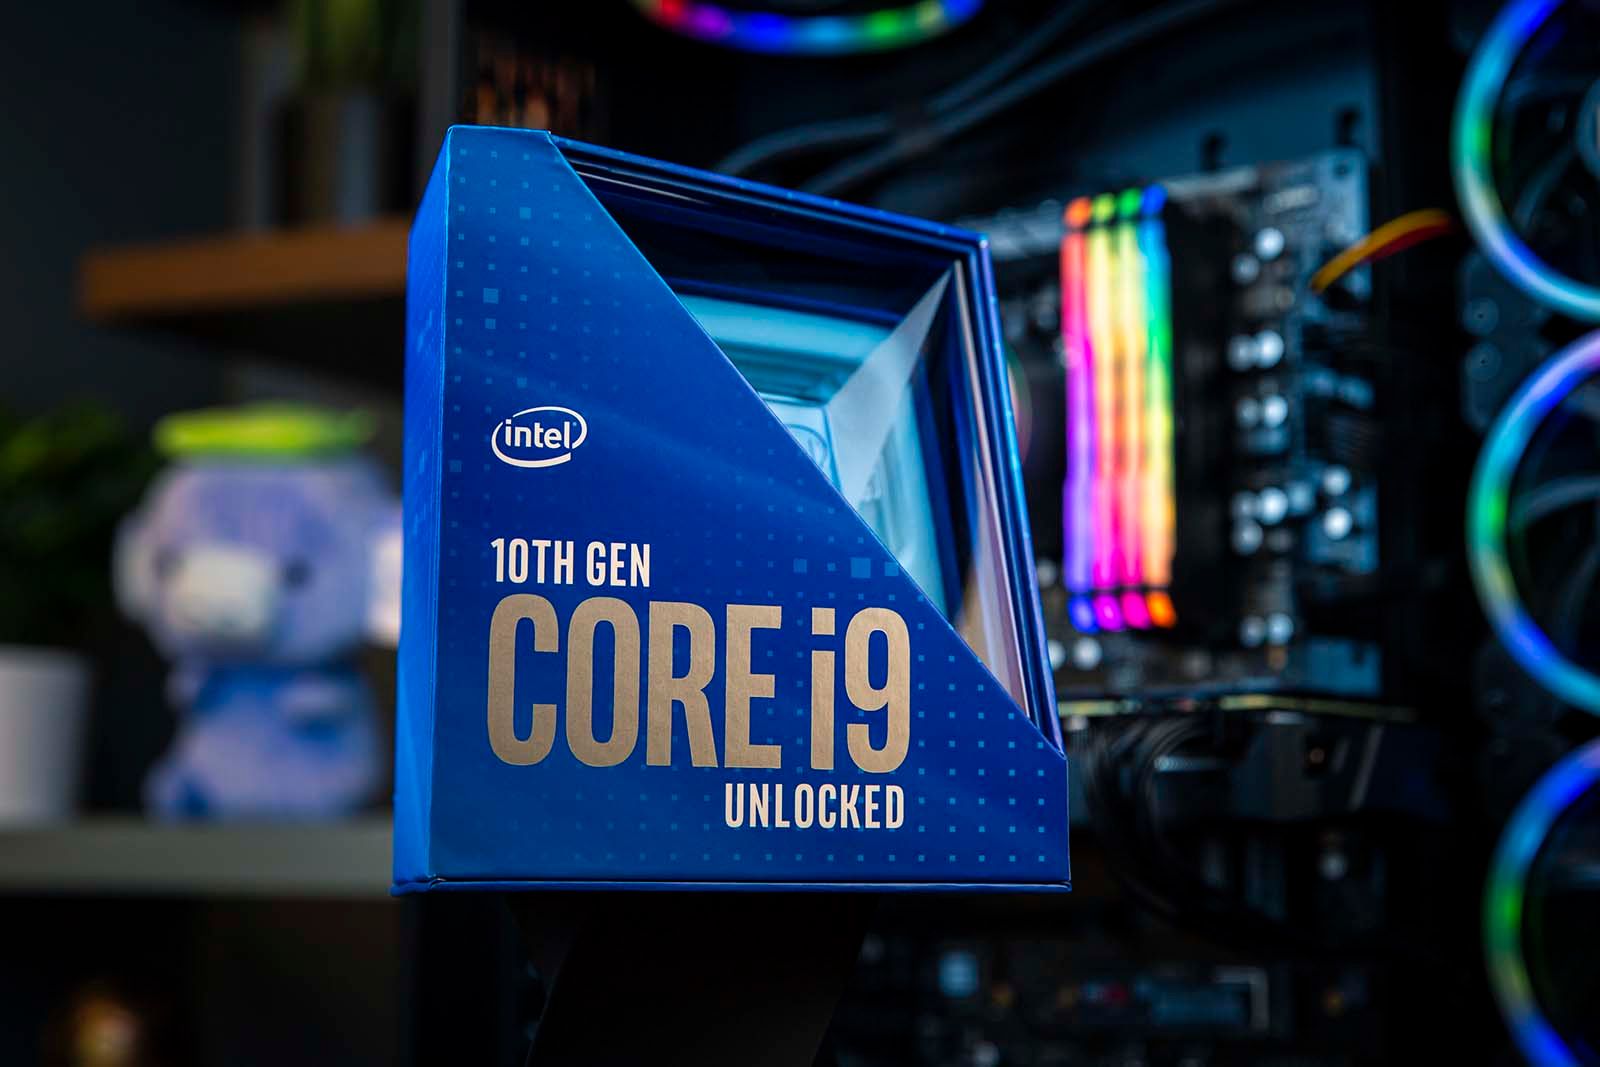 Intel claims 10th Gen Core i9-10900K is worlds fastest gaming processor image 1